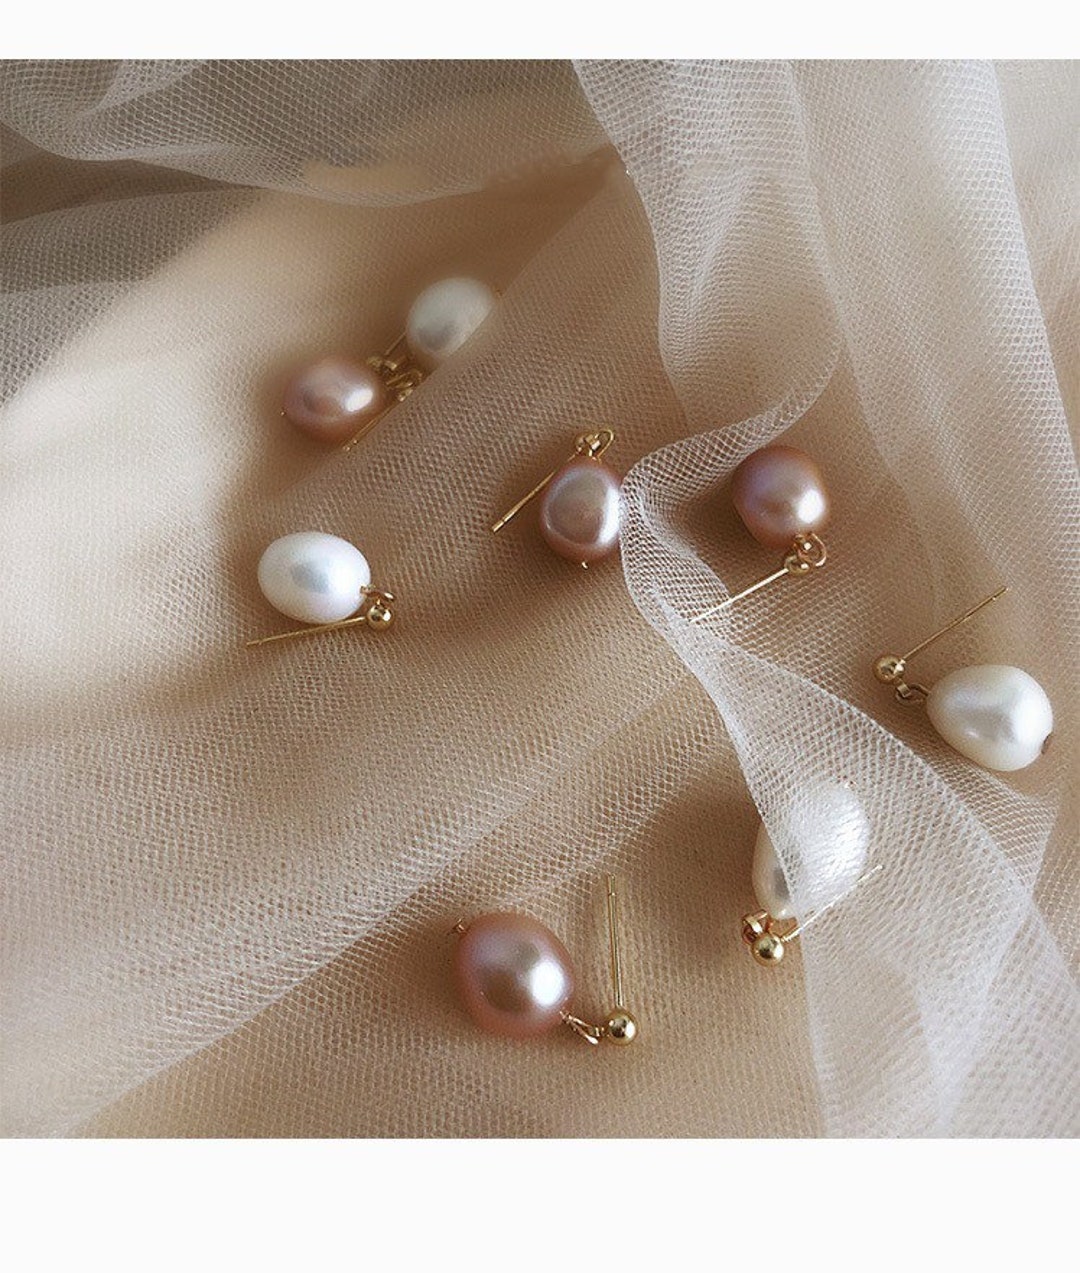 White & Lilac Baroque Pearl Gold Earrings, Minimalist Pearl Drop Earrings  for Everyday, Brides Bridesmaids Earrings, Gift for Her - Etsy